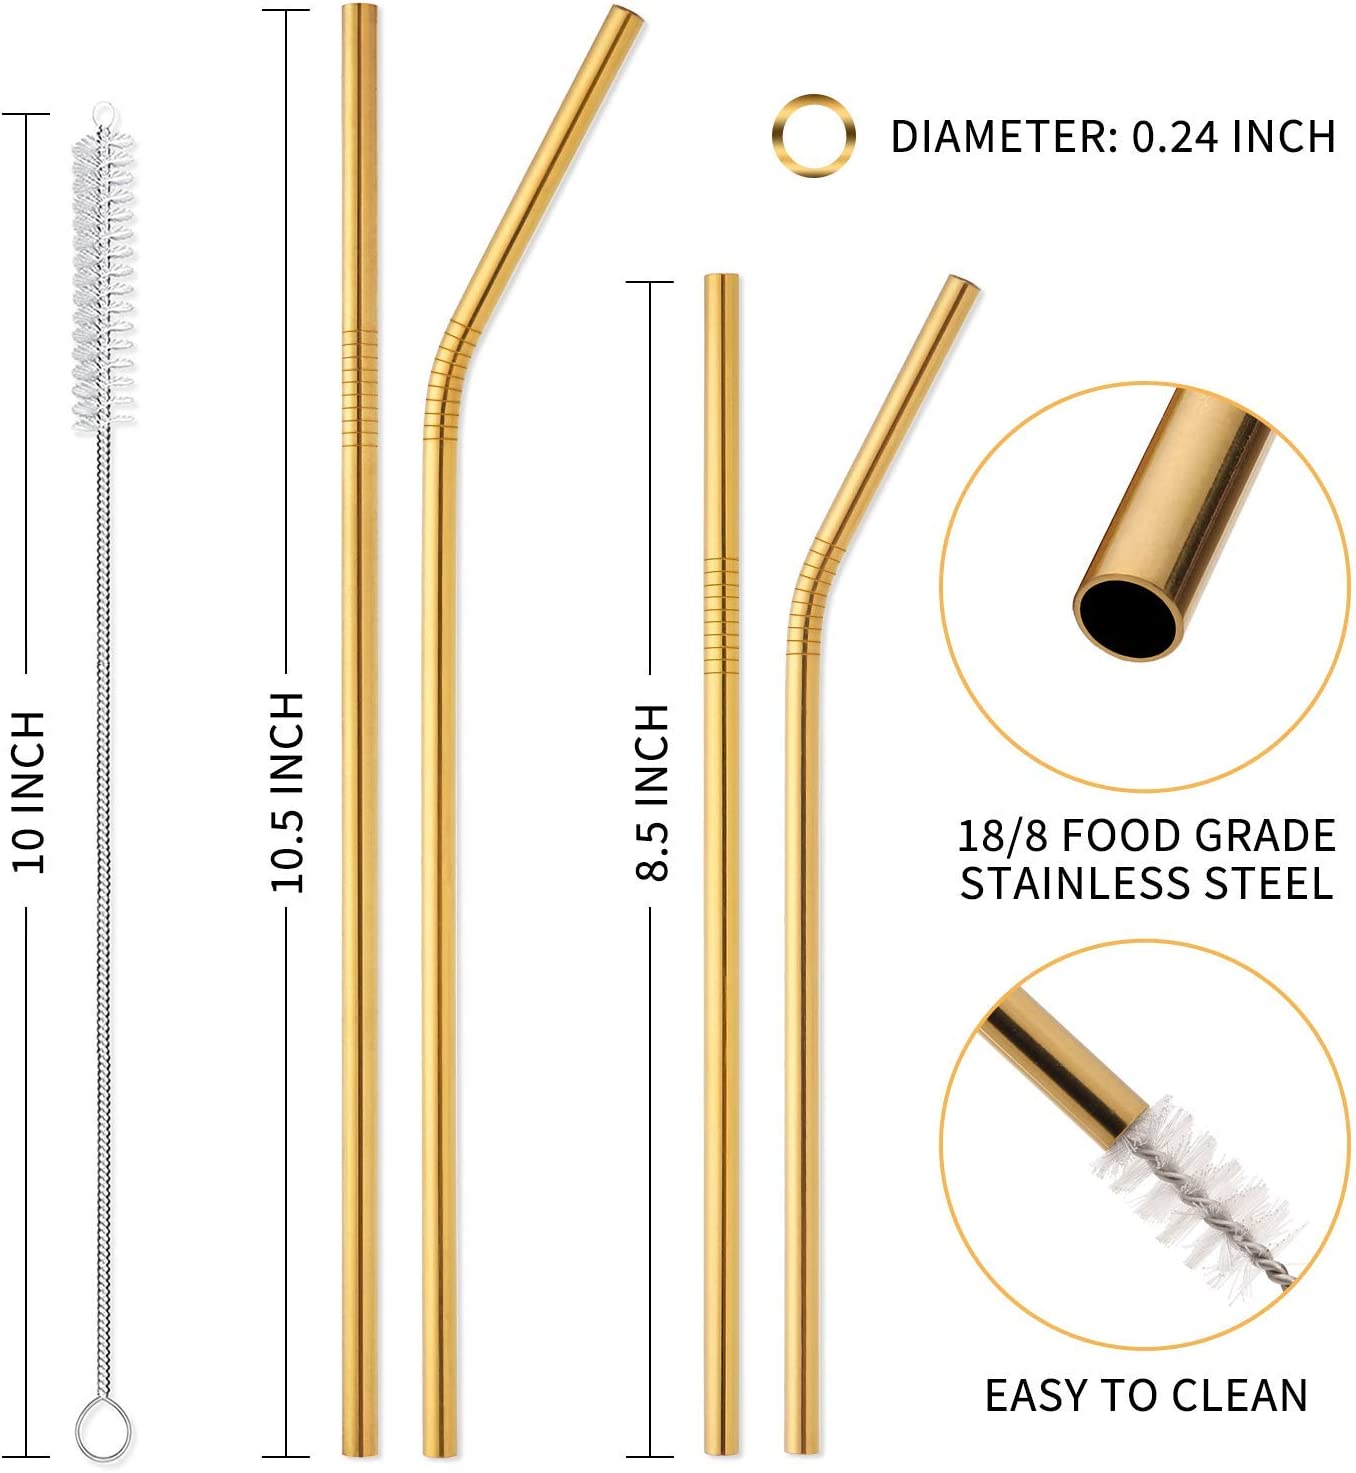 Camping Steel Cutlery Set of 4, 4 Metal Straws with 1 Cleaning Brush - Star Work 